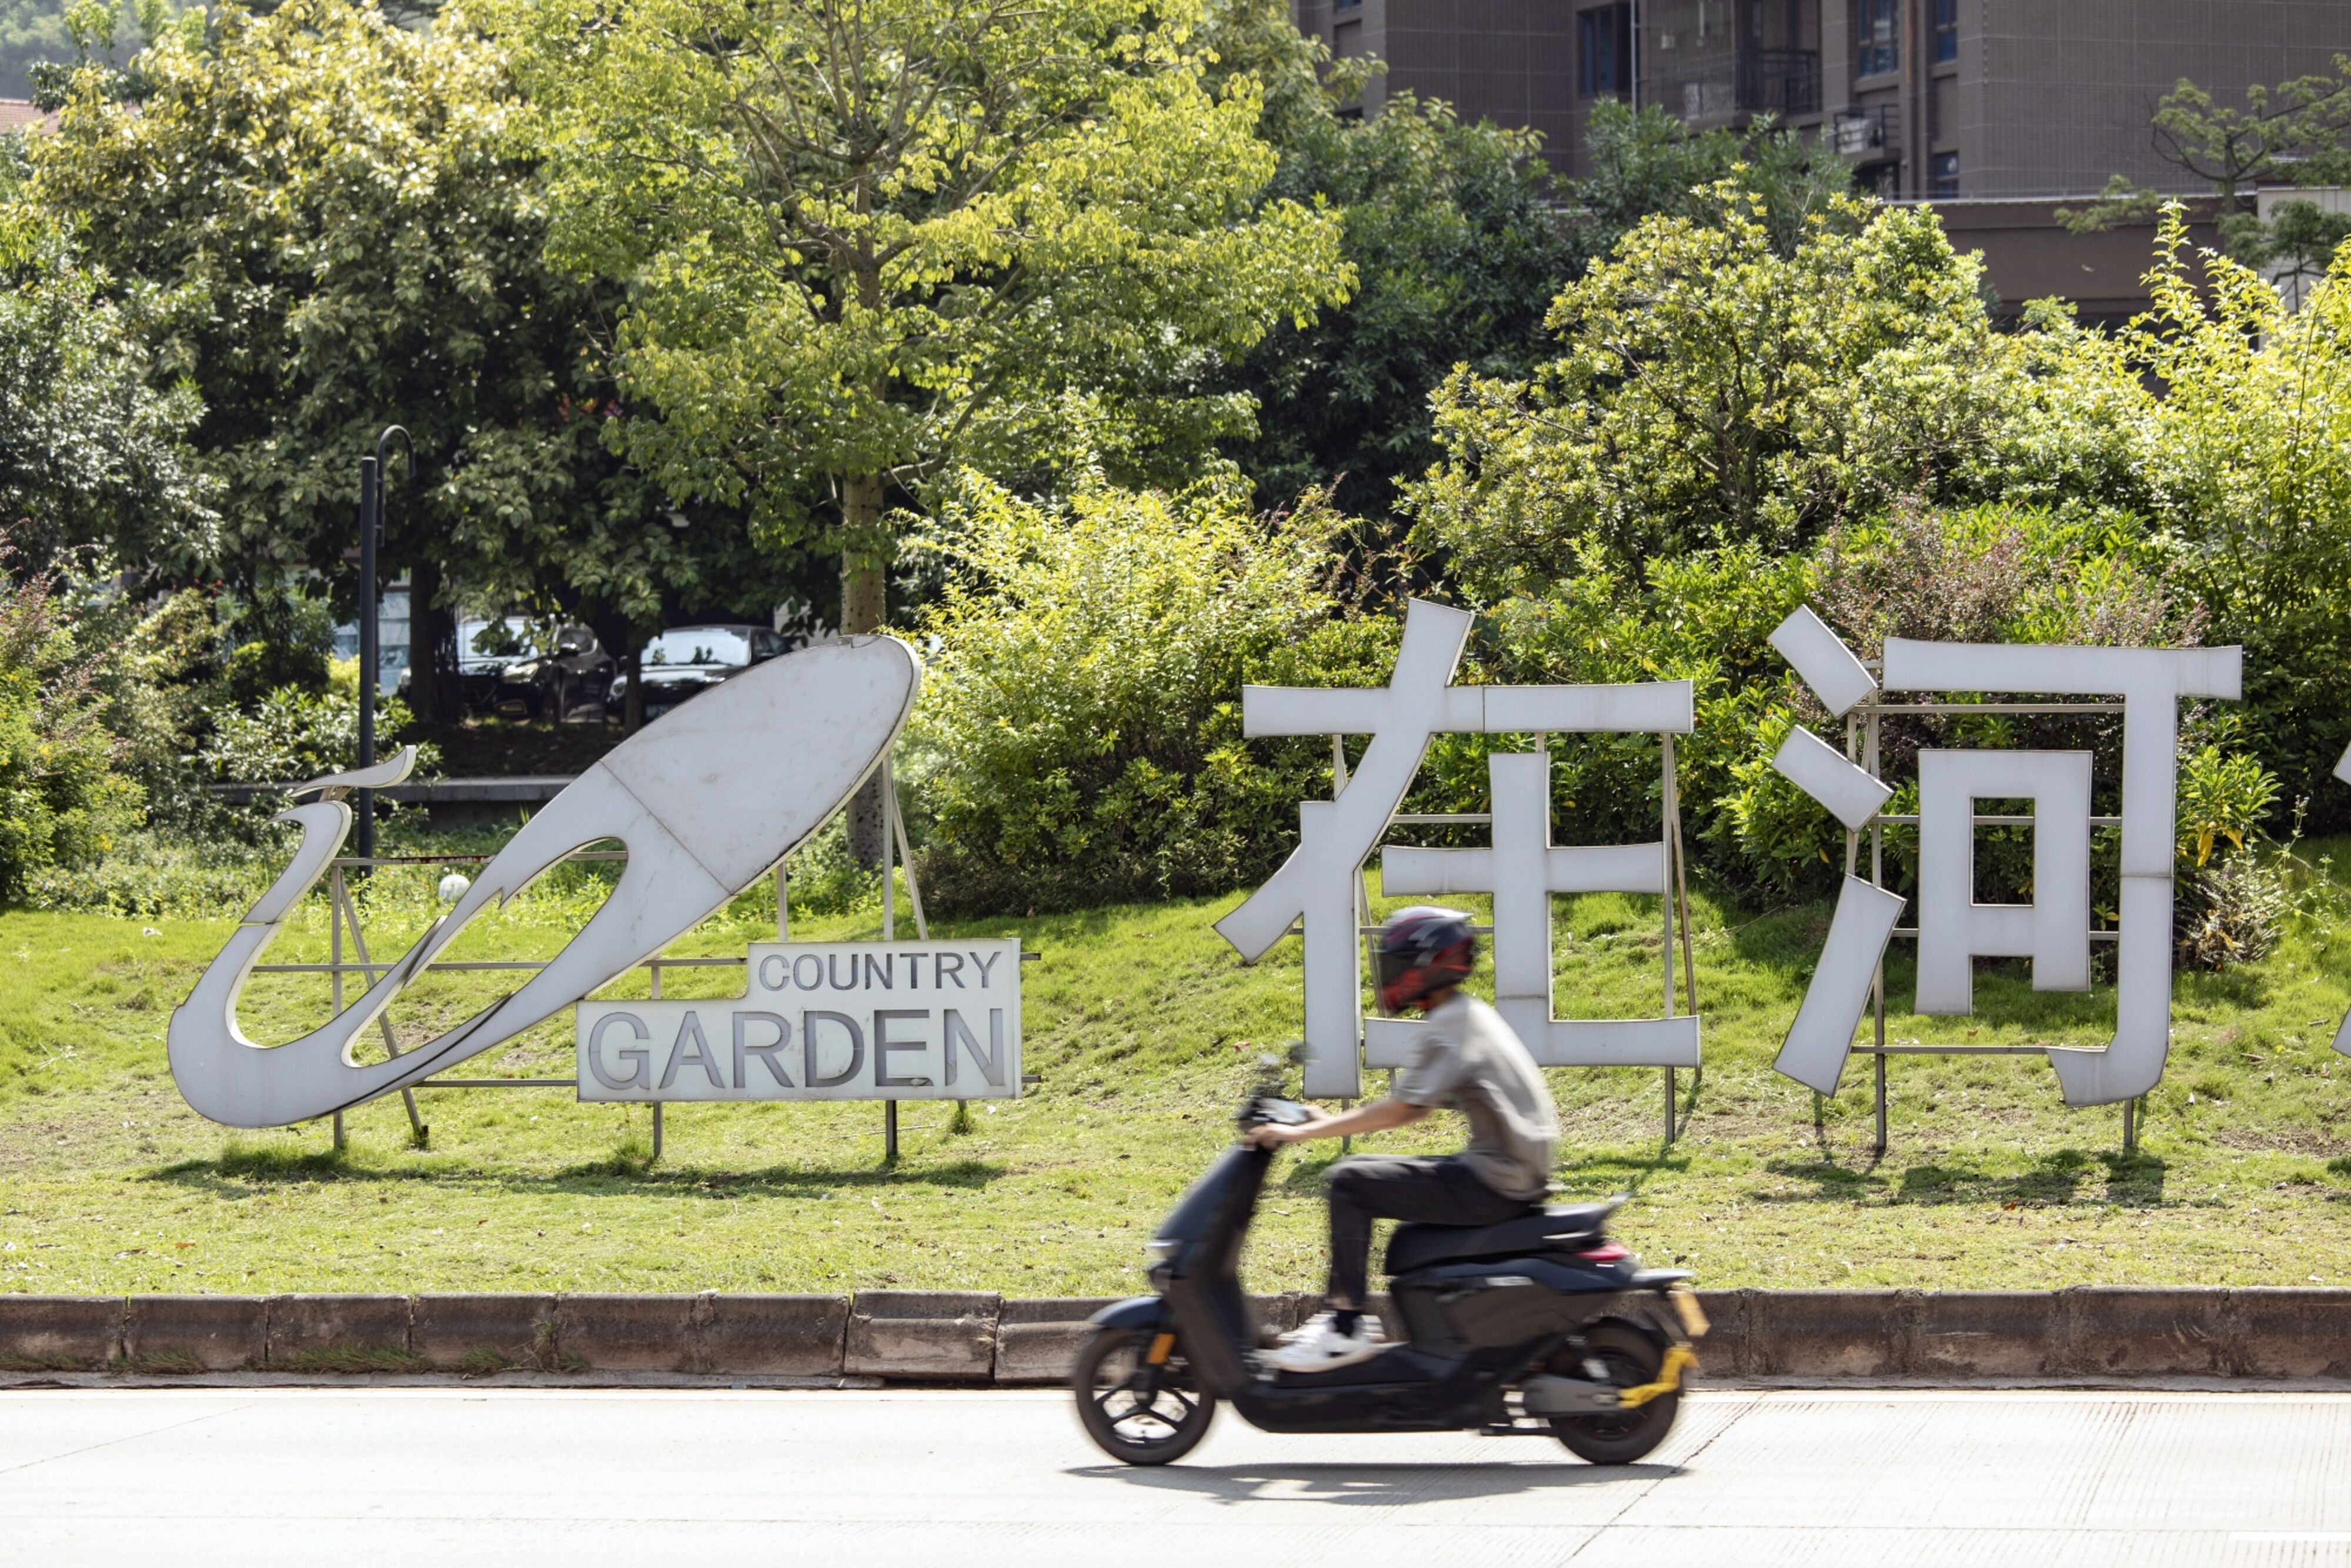 Country Garden, once hailed as a likely survivor of China’s real estate crisis, roiled markets last year when it defaulted on its dollar debt. Photo: Bloomberg